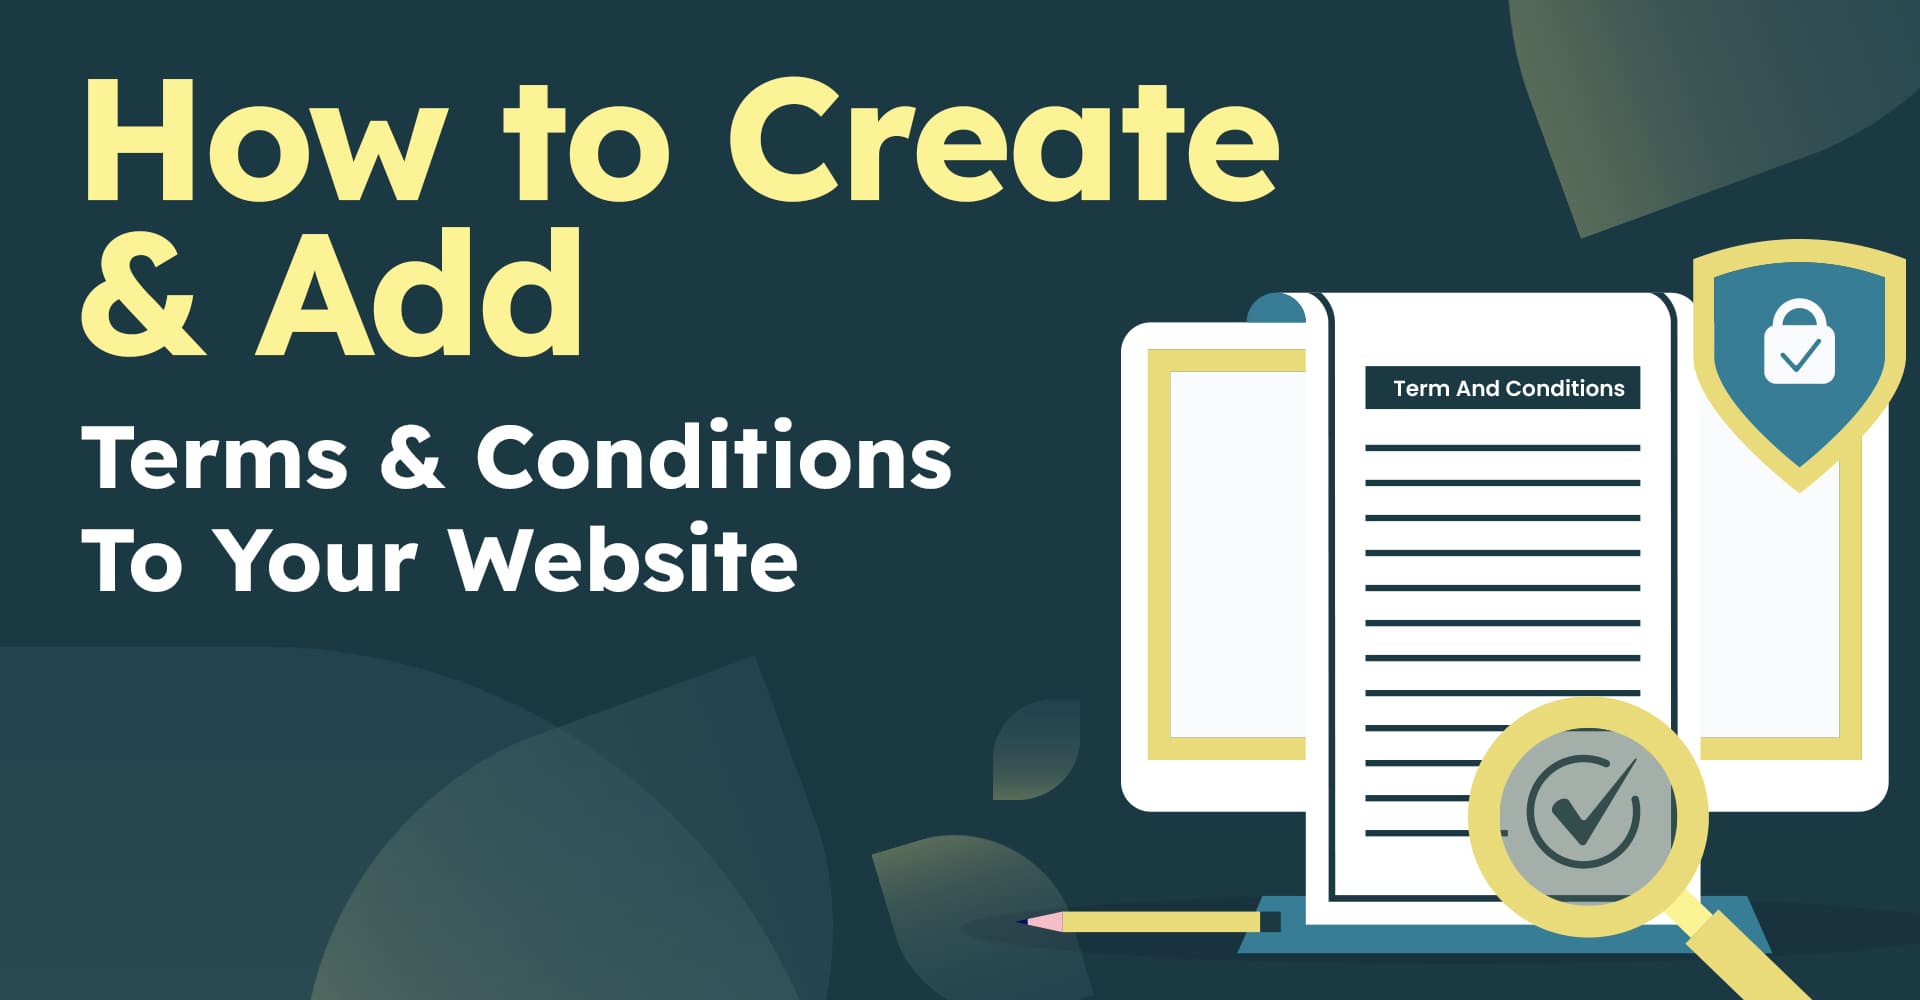 Create & Add Terms and Conditions to Your Website (Step-by-Step)